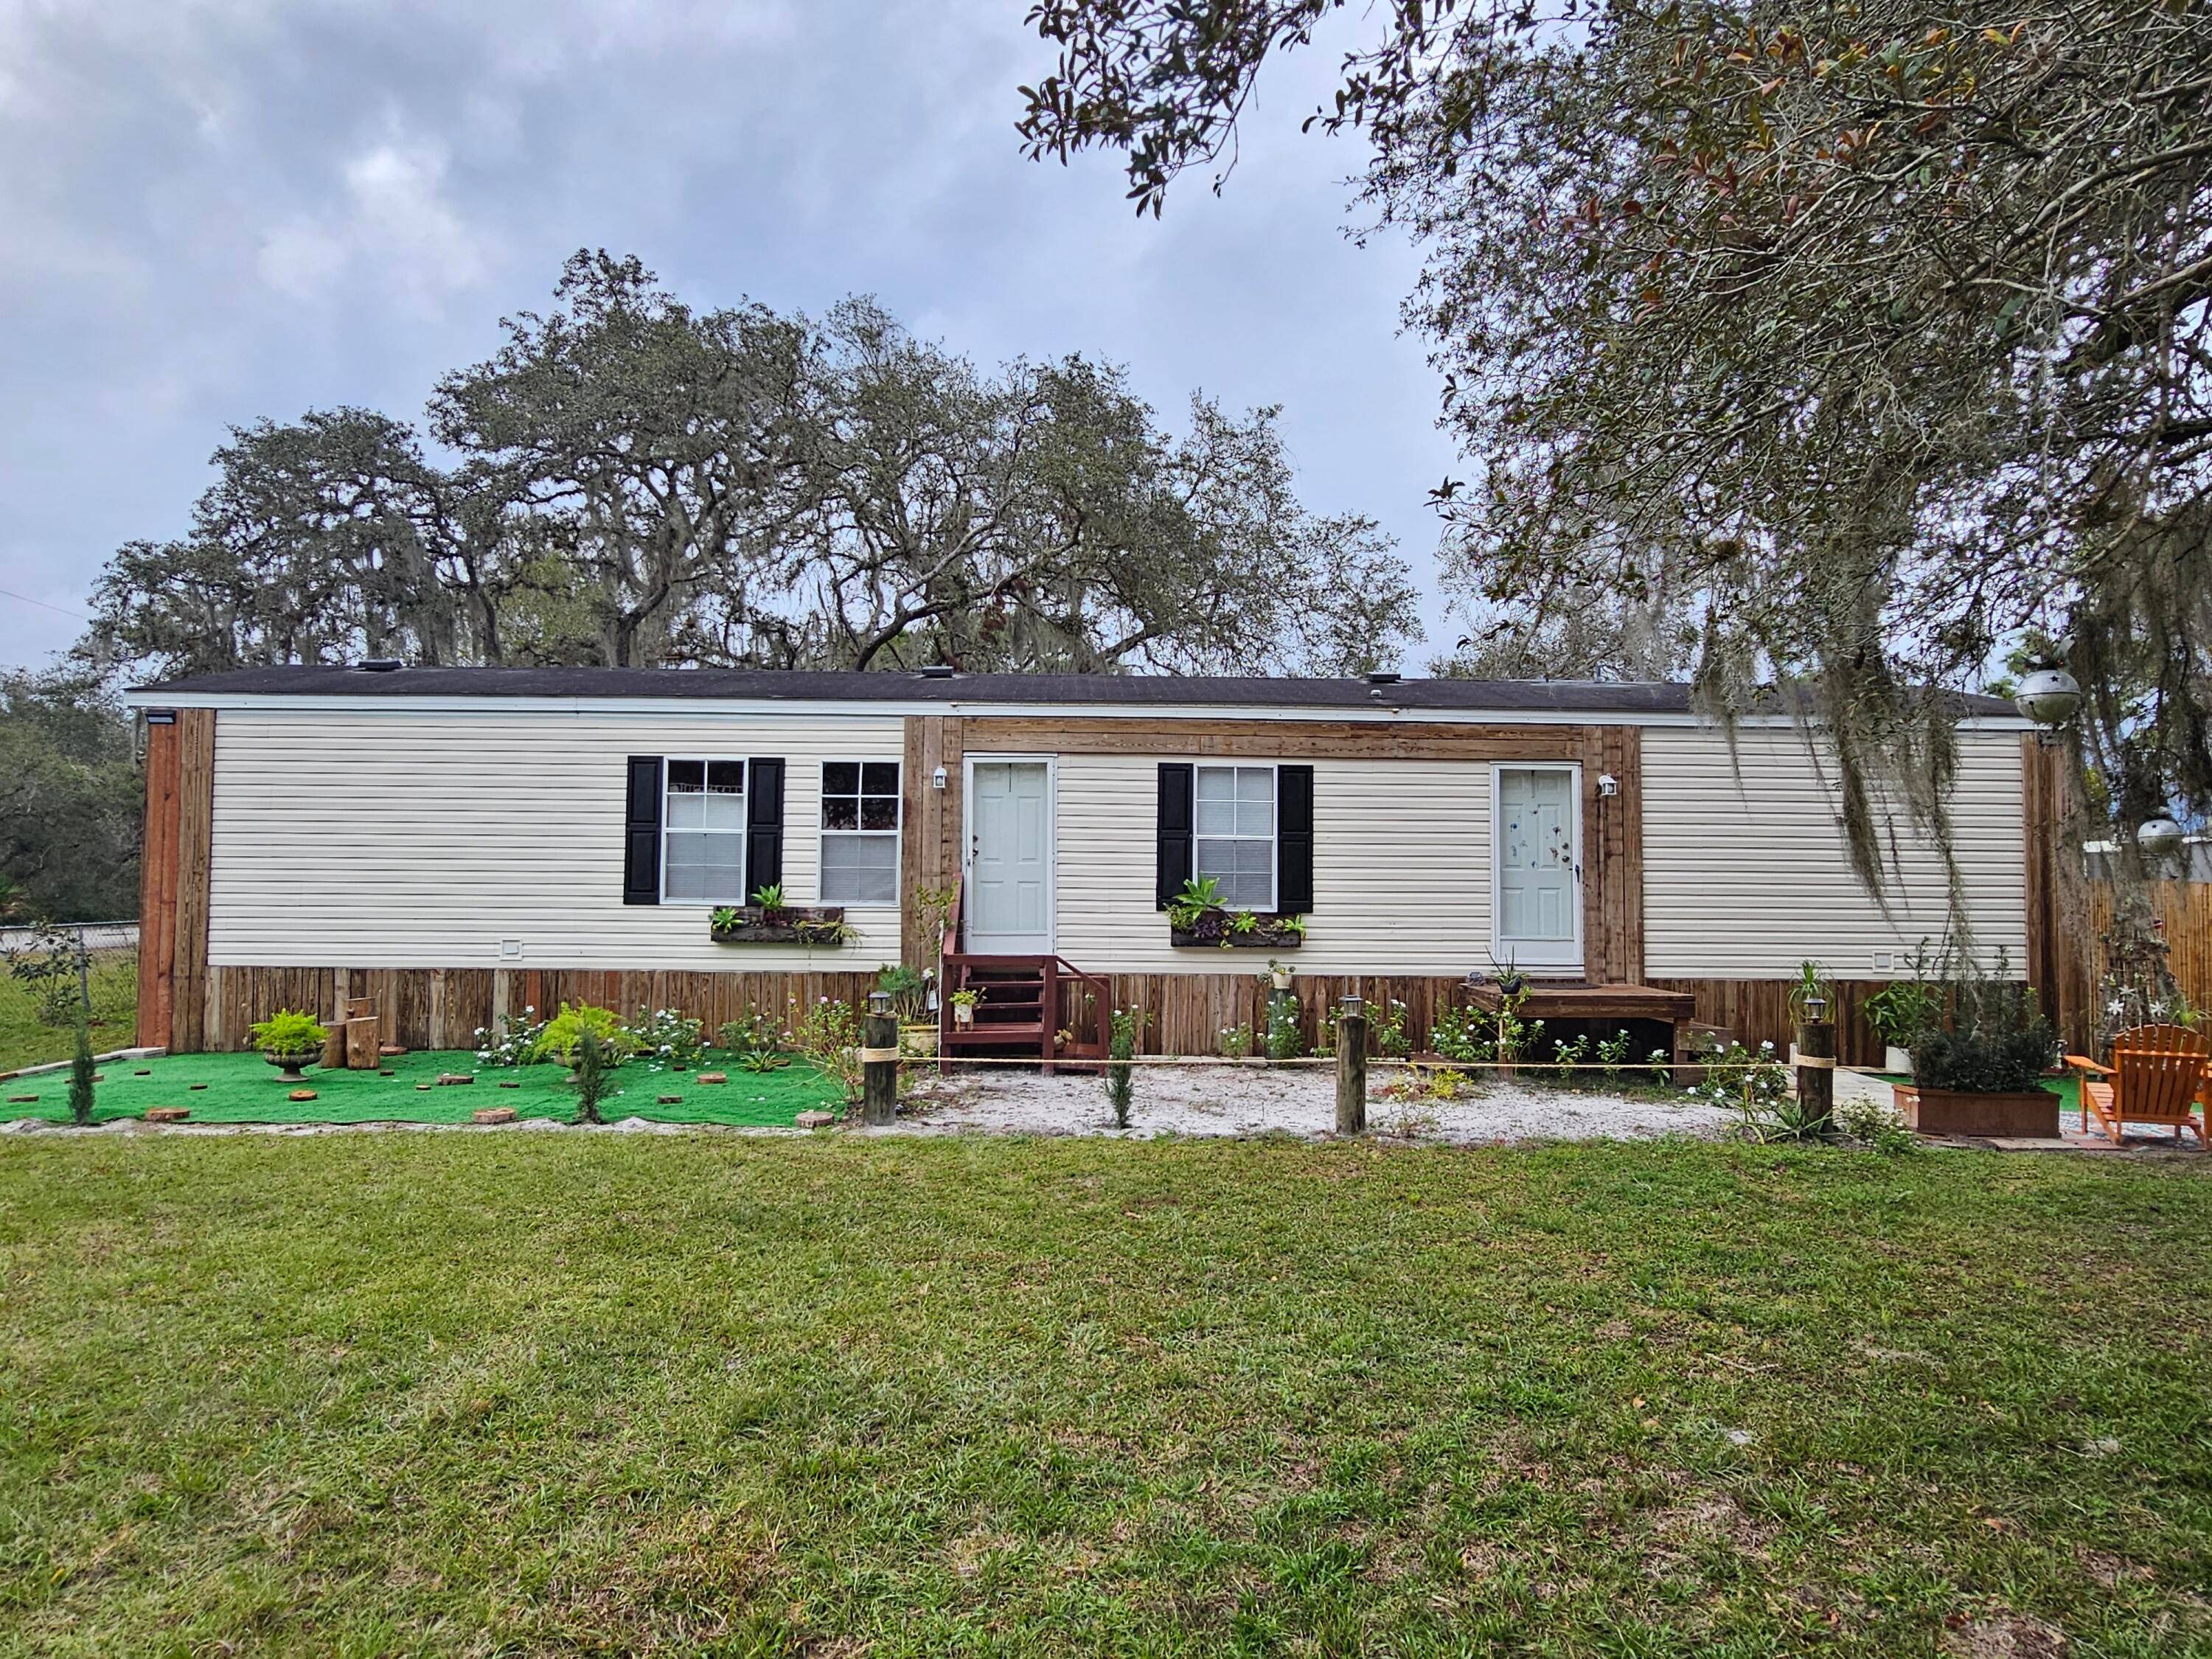 Experience the warmth of Home in this distinctive cozy property, close to downtown Okeechobee.